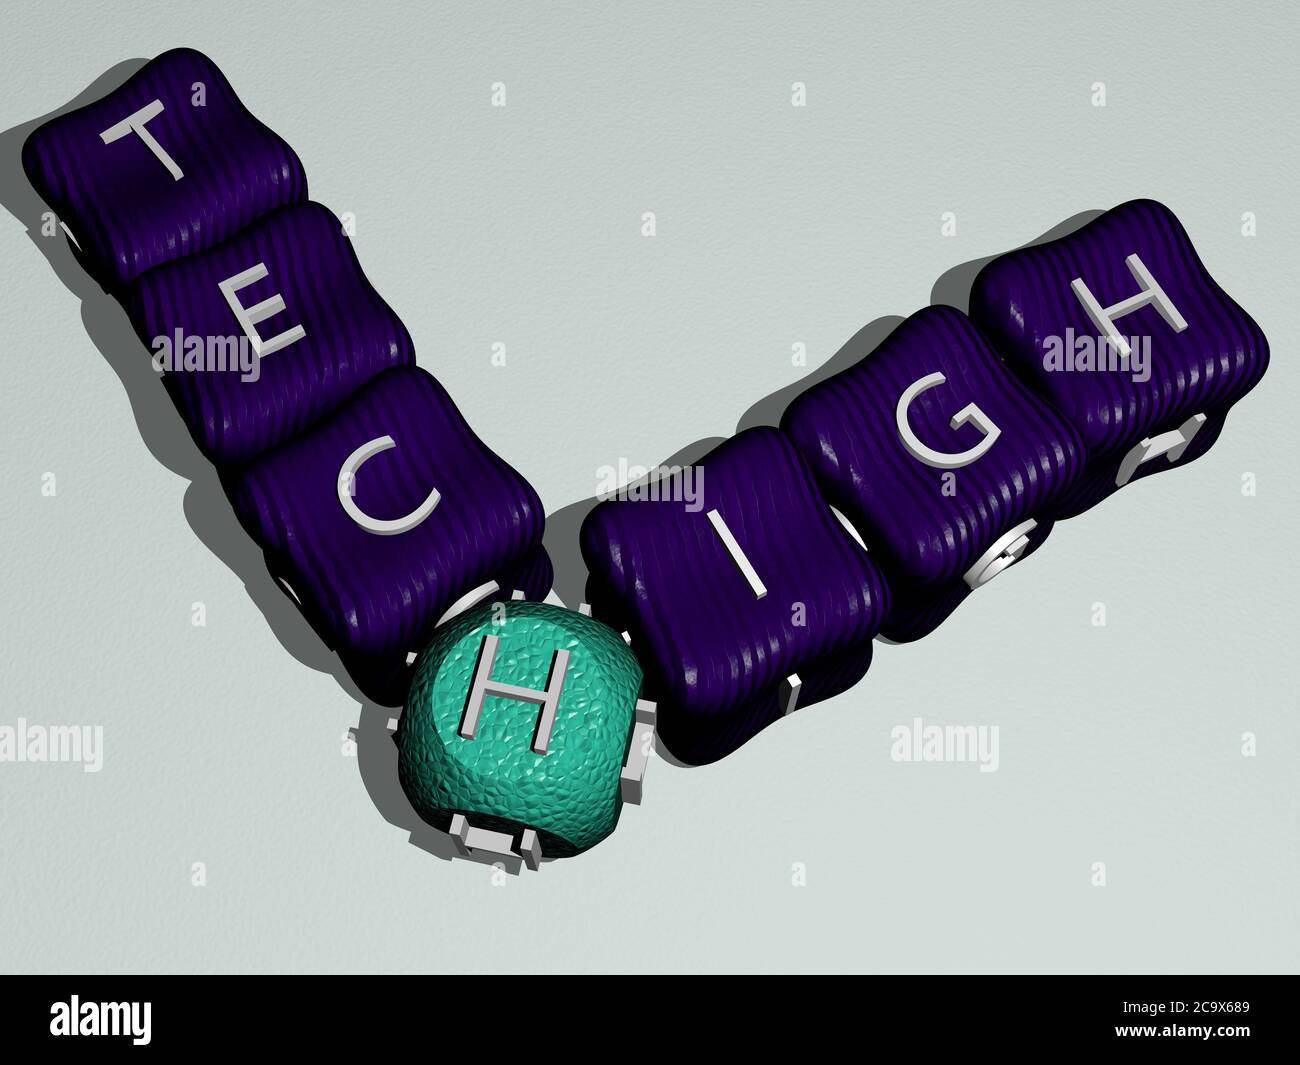 https://c8.alamy.com/comp/2C9X689/combination-of-high-tech-built-by-cubic-letters-from-the-top-perspective-excellent-for-the-concept-presentation-background-and-blue-3d-illustration-2C9X689.jpg